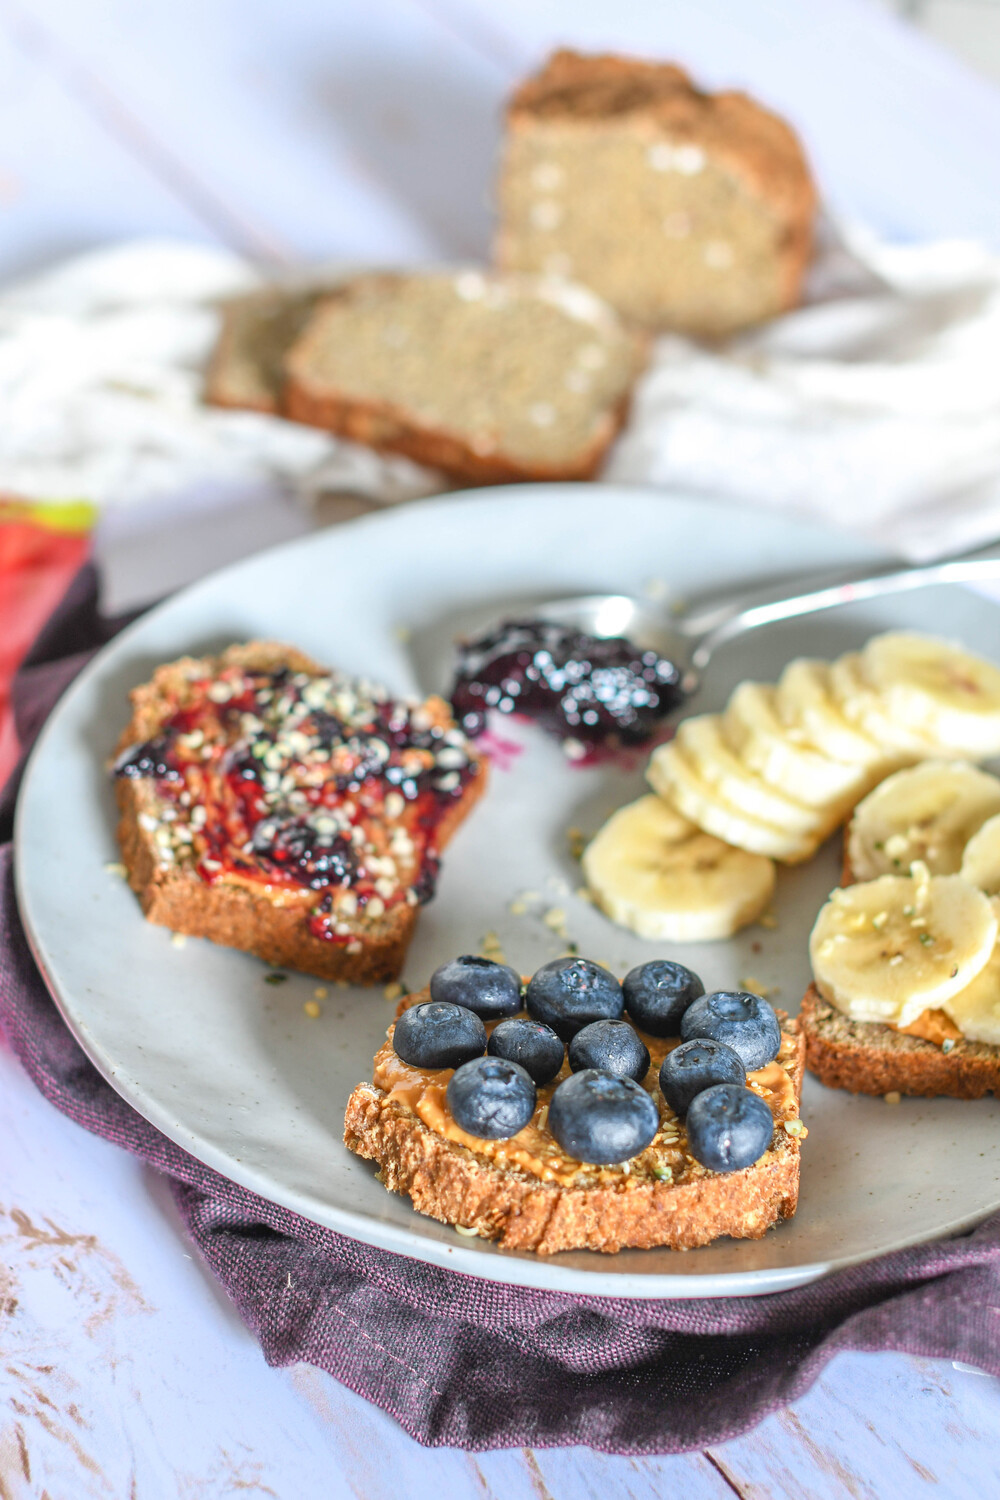 Toast with Blueberries and Banana